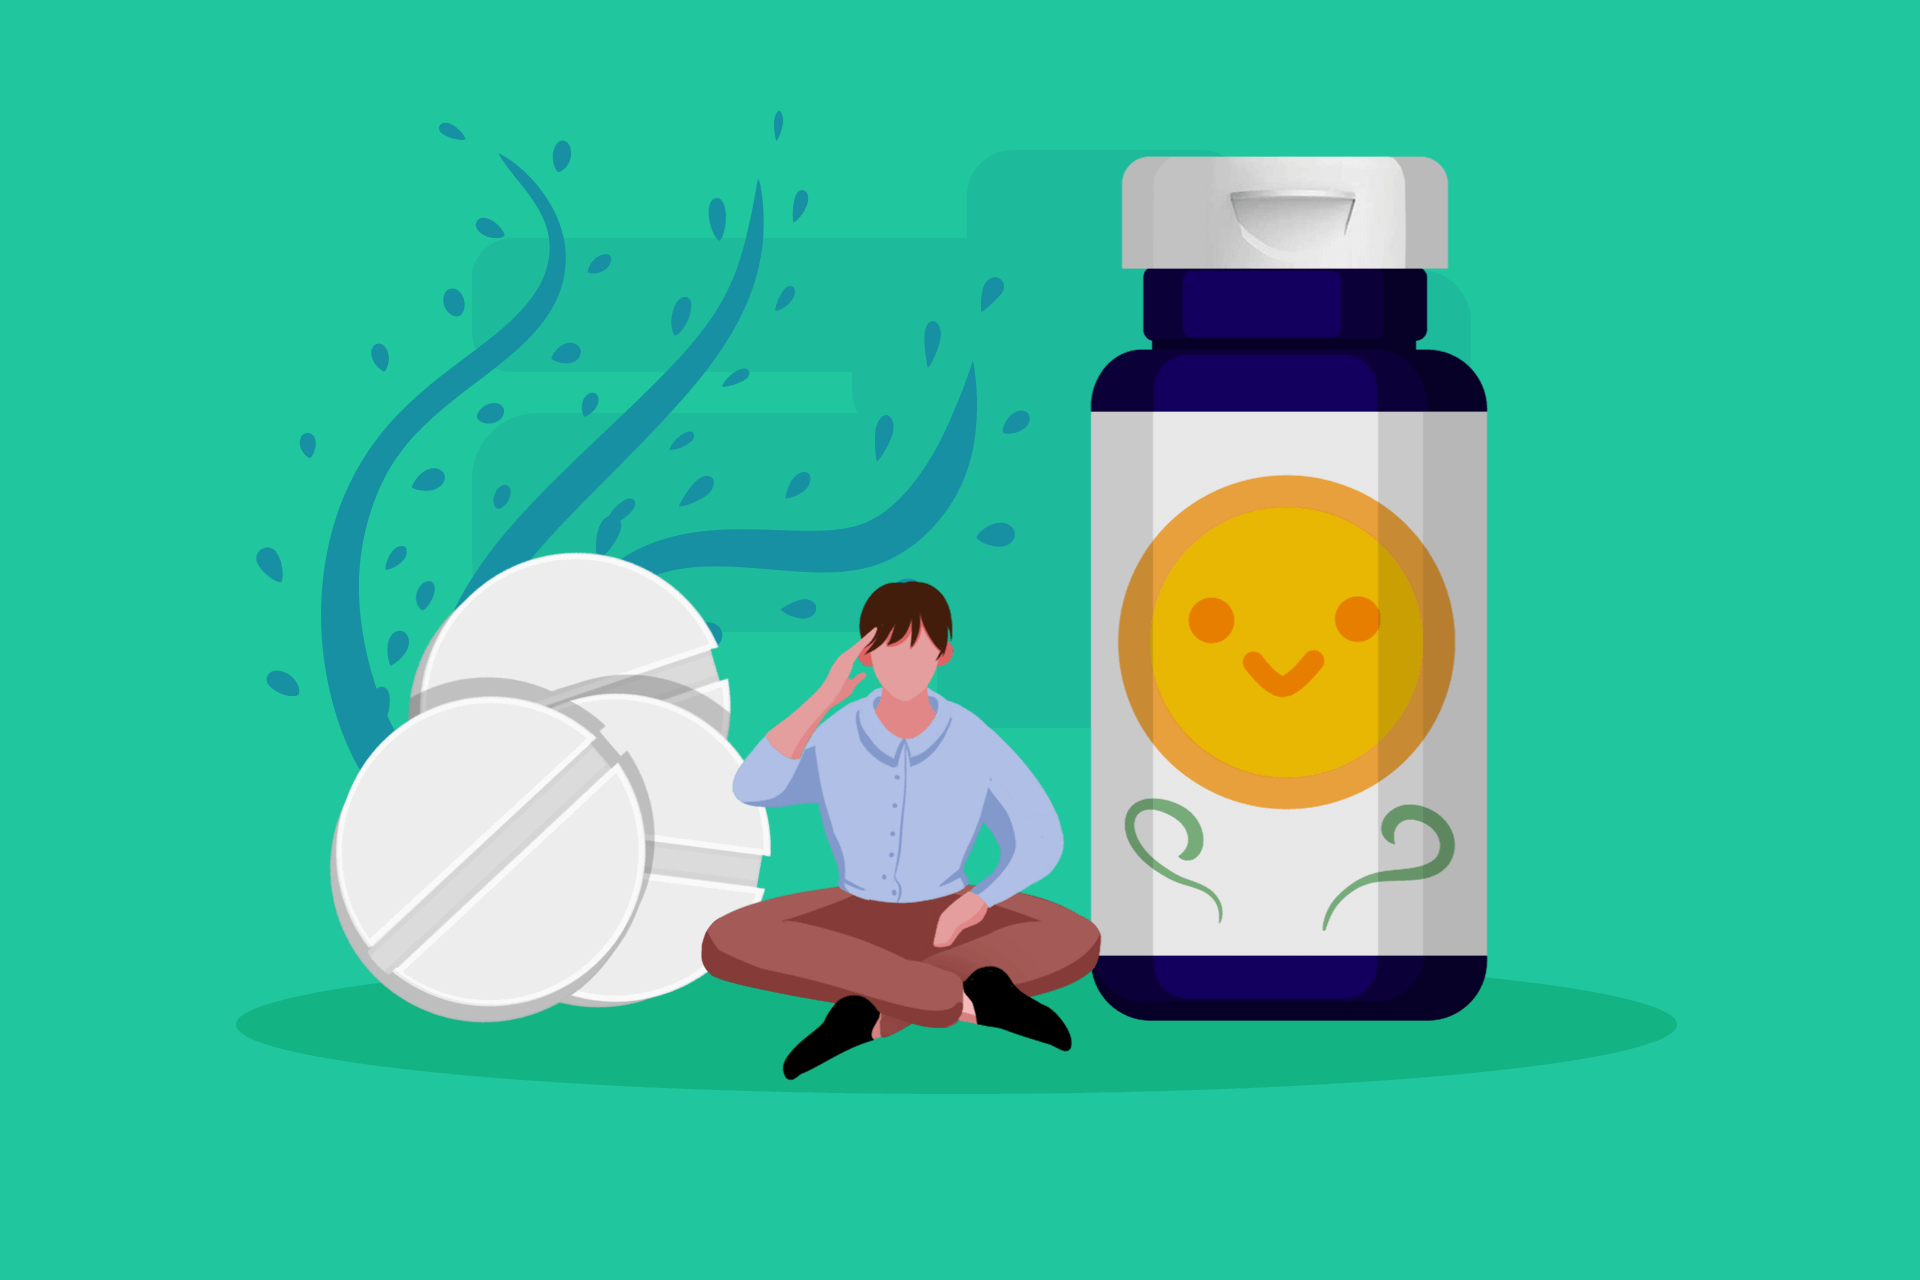 Guide to Mixing Modafinil and Antidepressants